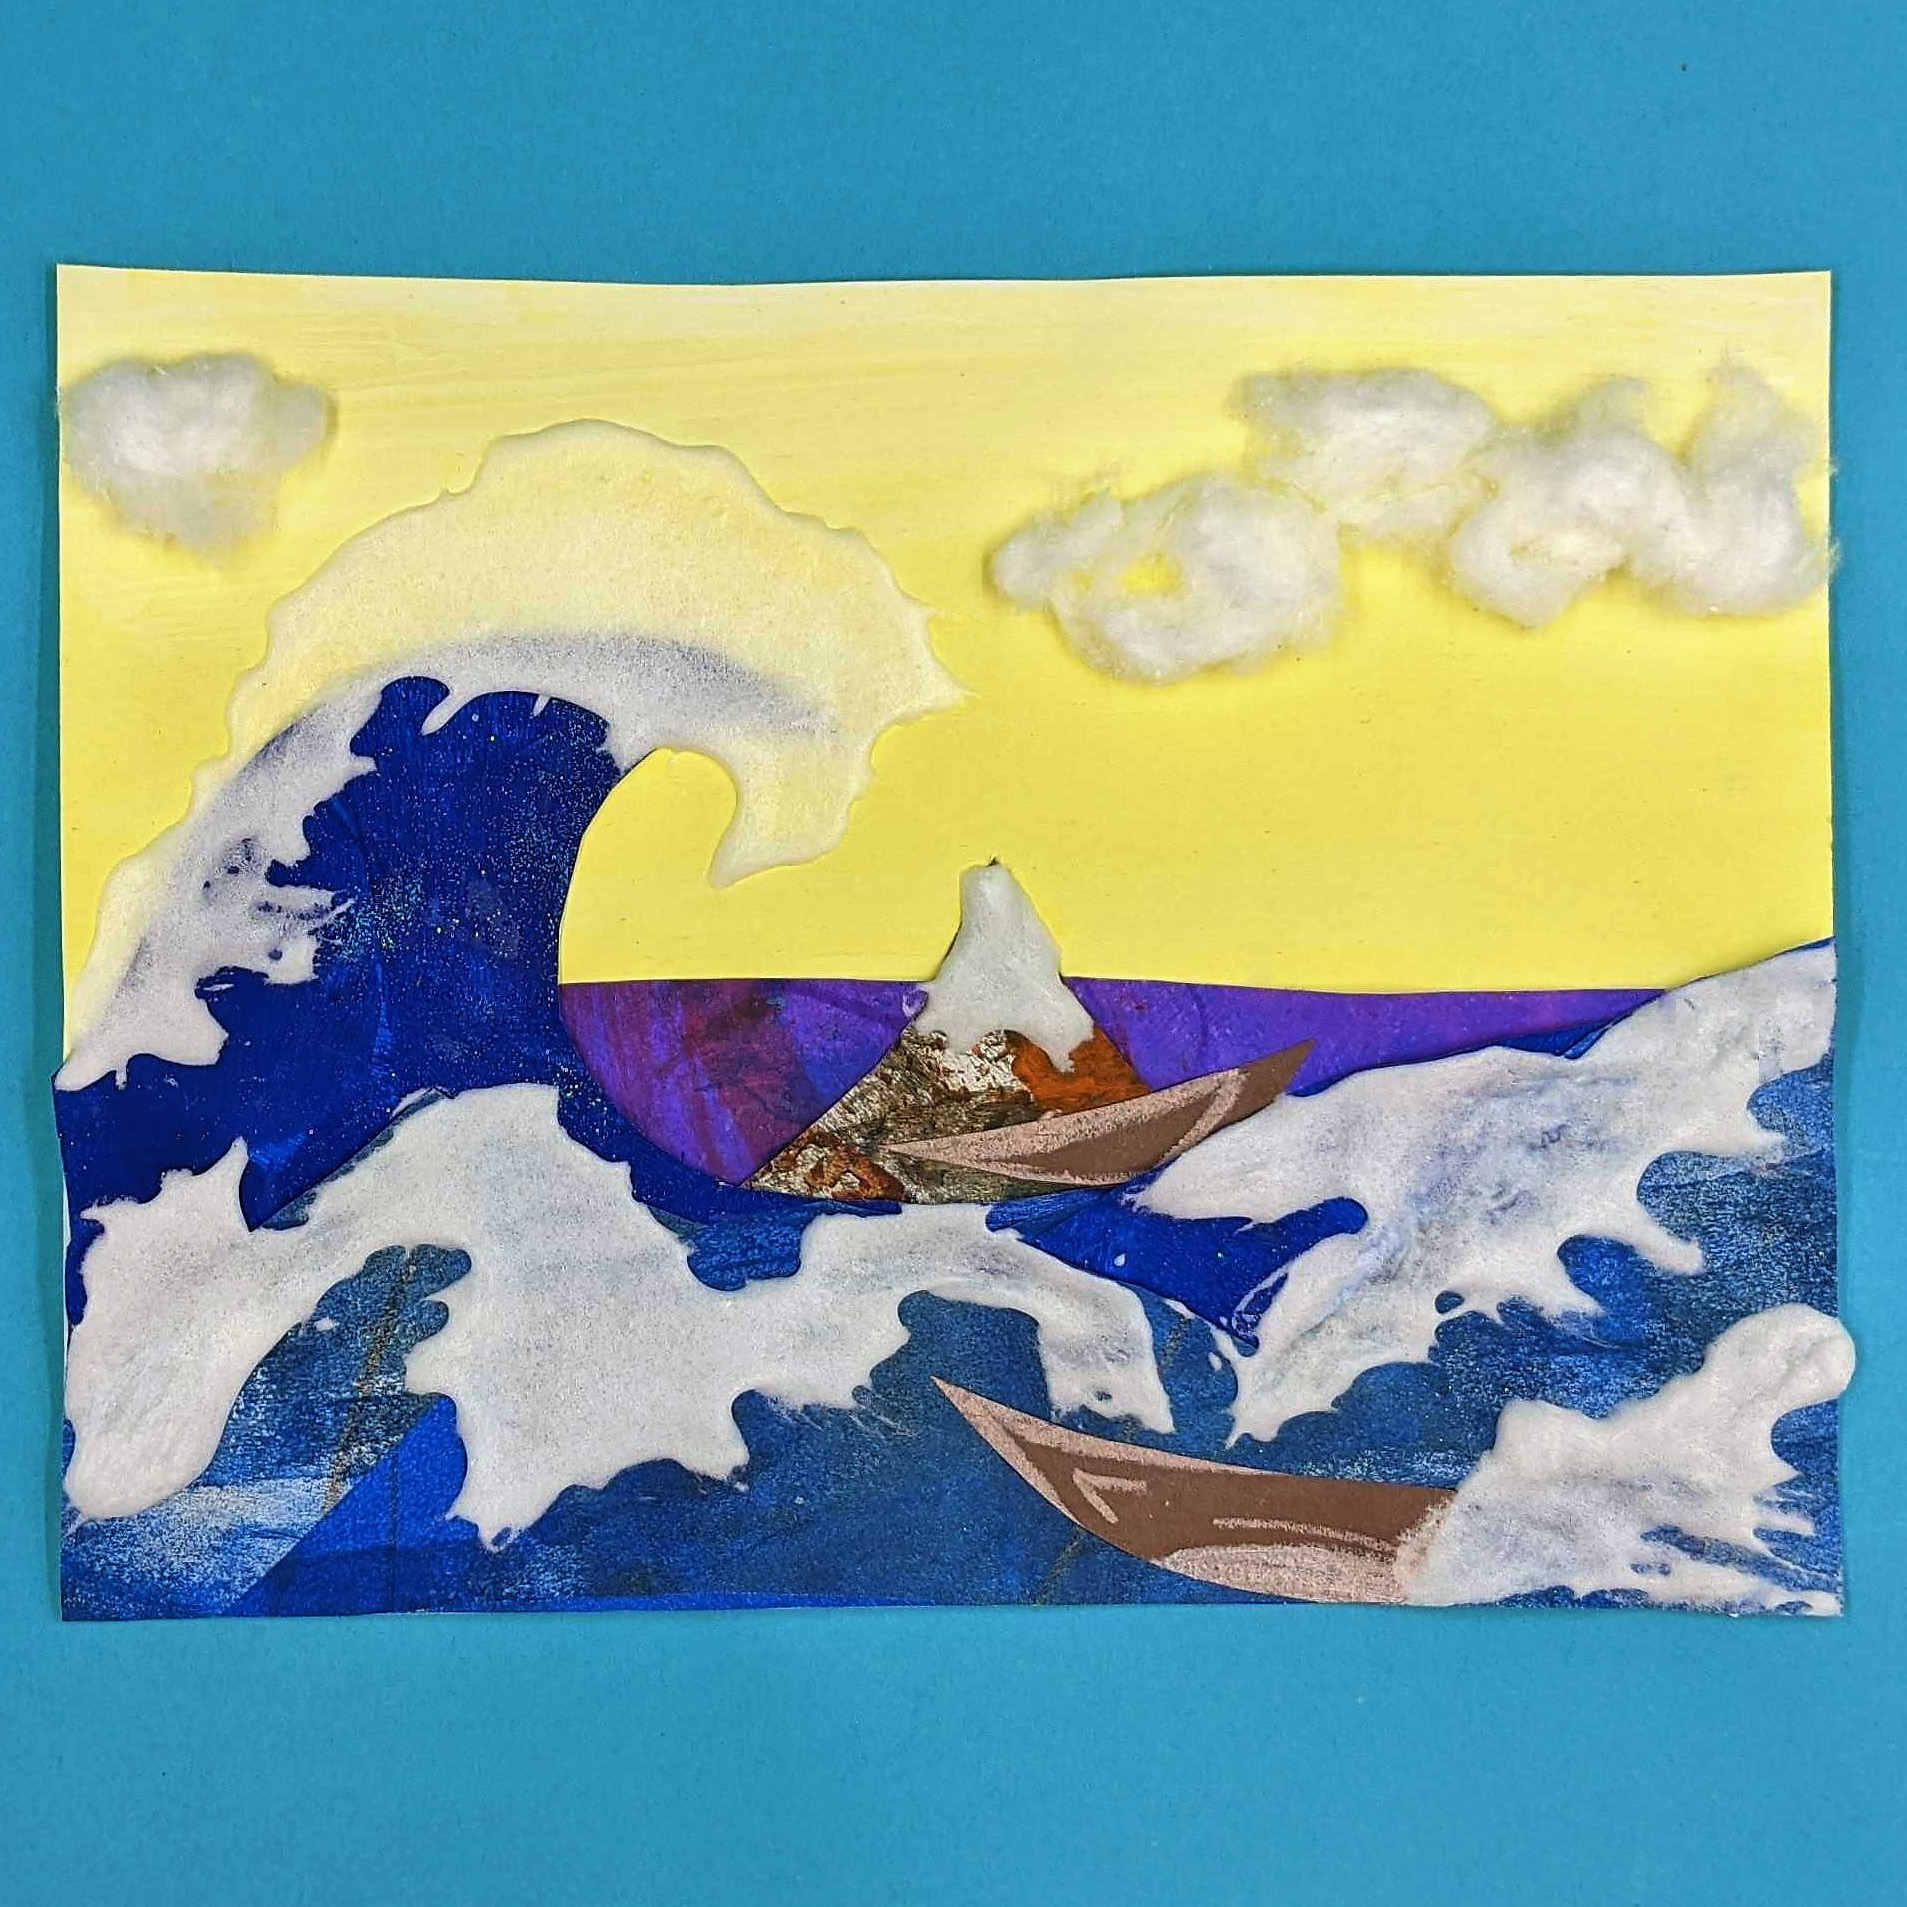 Kidcreate Studio - Brownsville, Hokusai's the great wave  Art Project